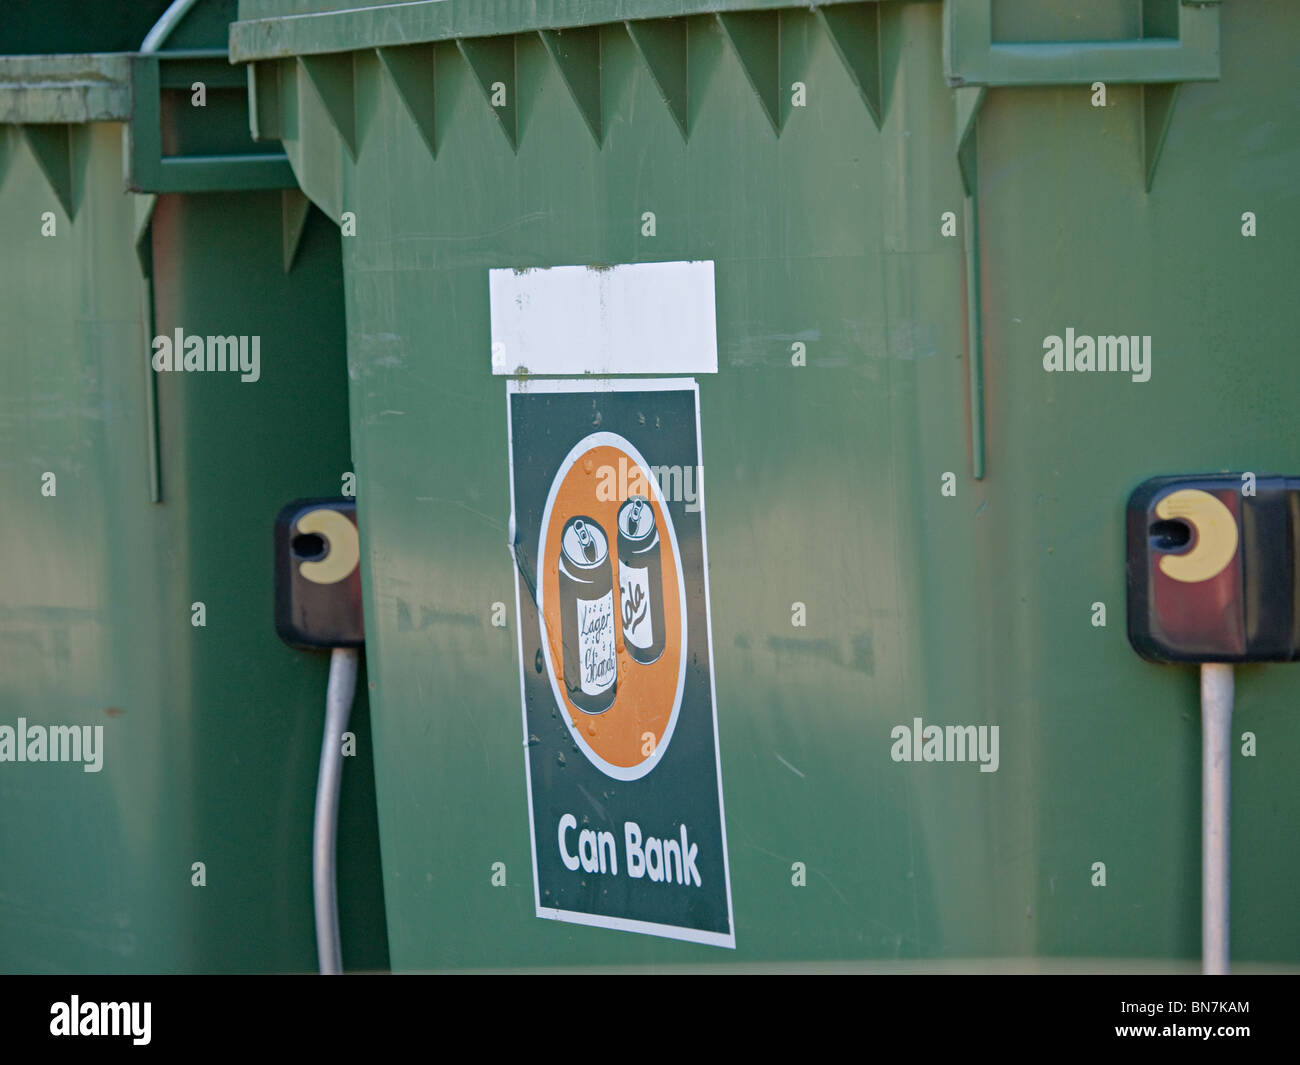 A recycling bin for cans Stock Photo